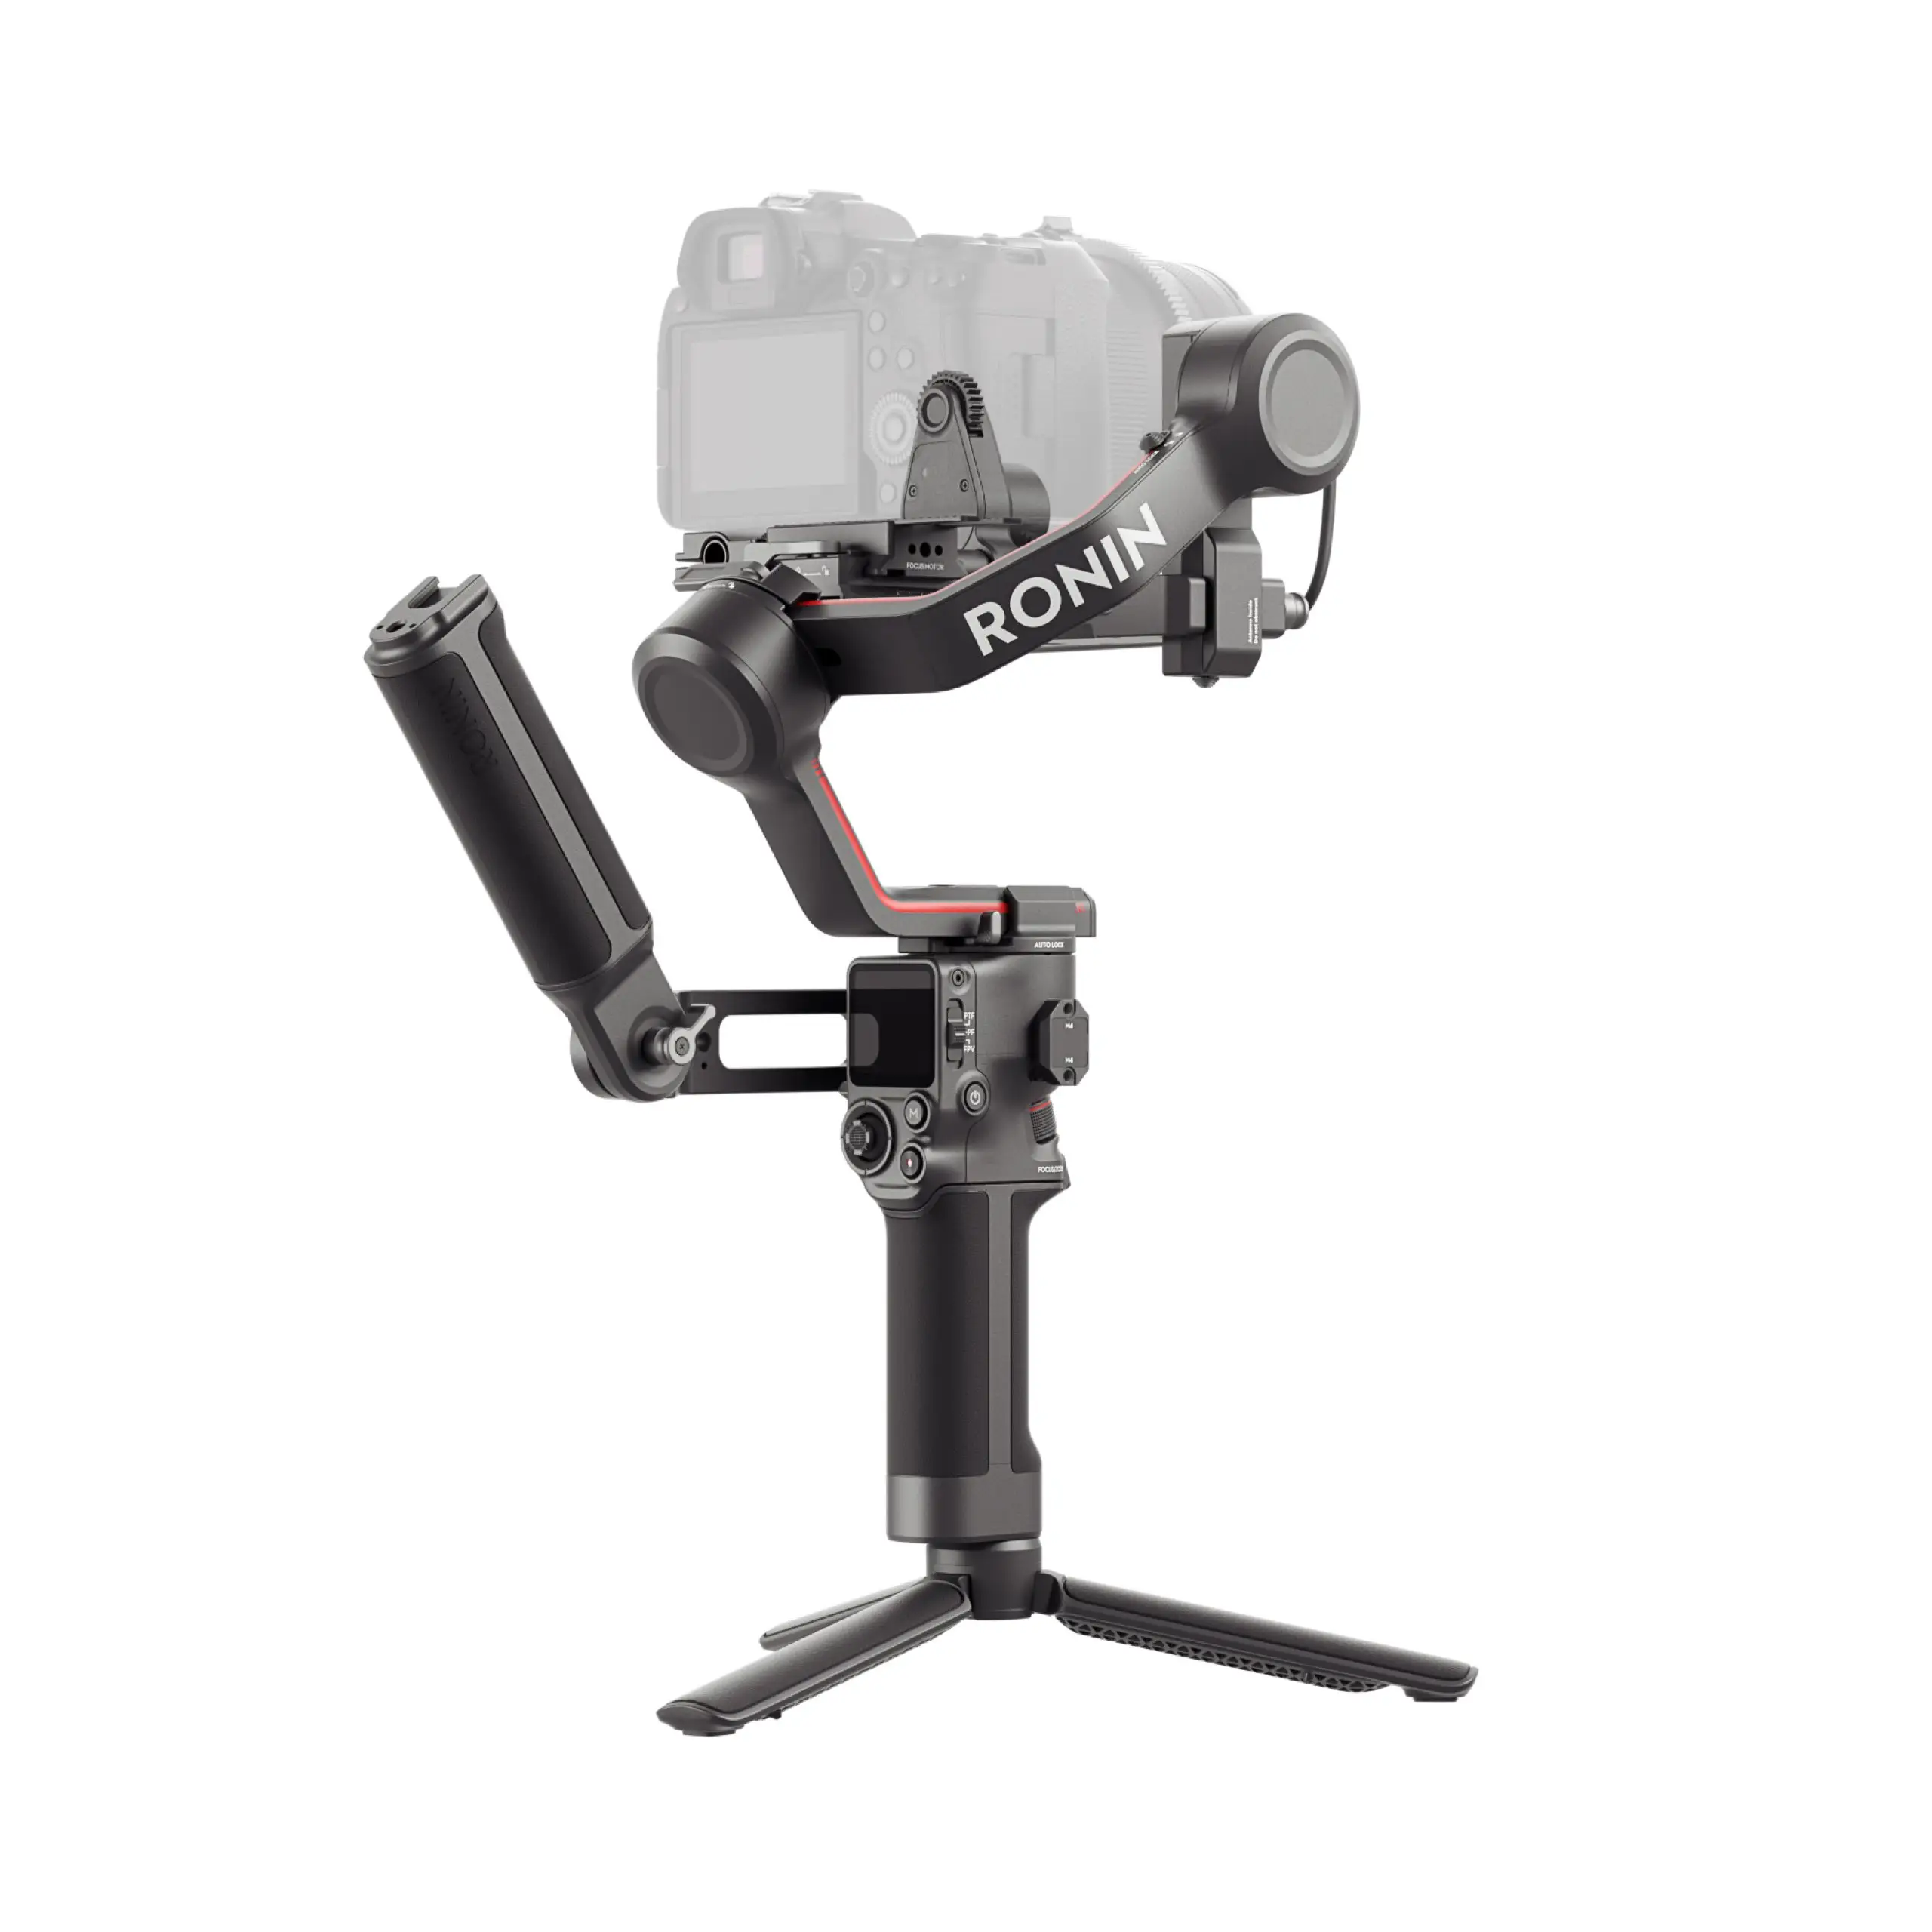 Sky Fly Original DJI RS3 RS 3 Pro Combo Stabilized Handheld Camera with 1.8" OLED Touchscreen 3rd-Gen RS Stabilization Algorithm